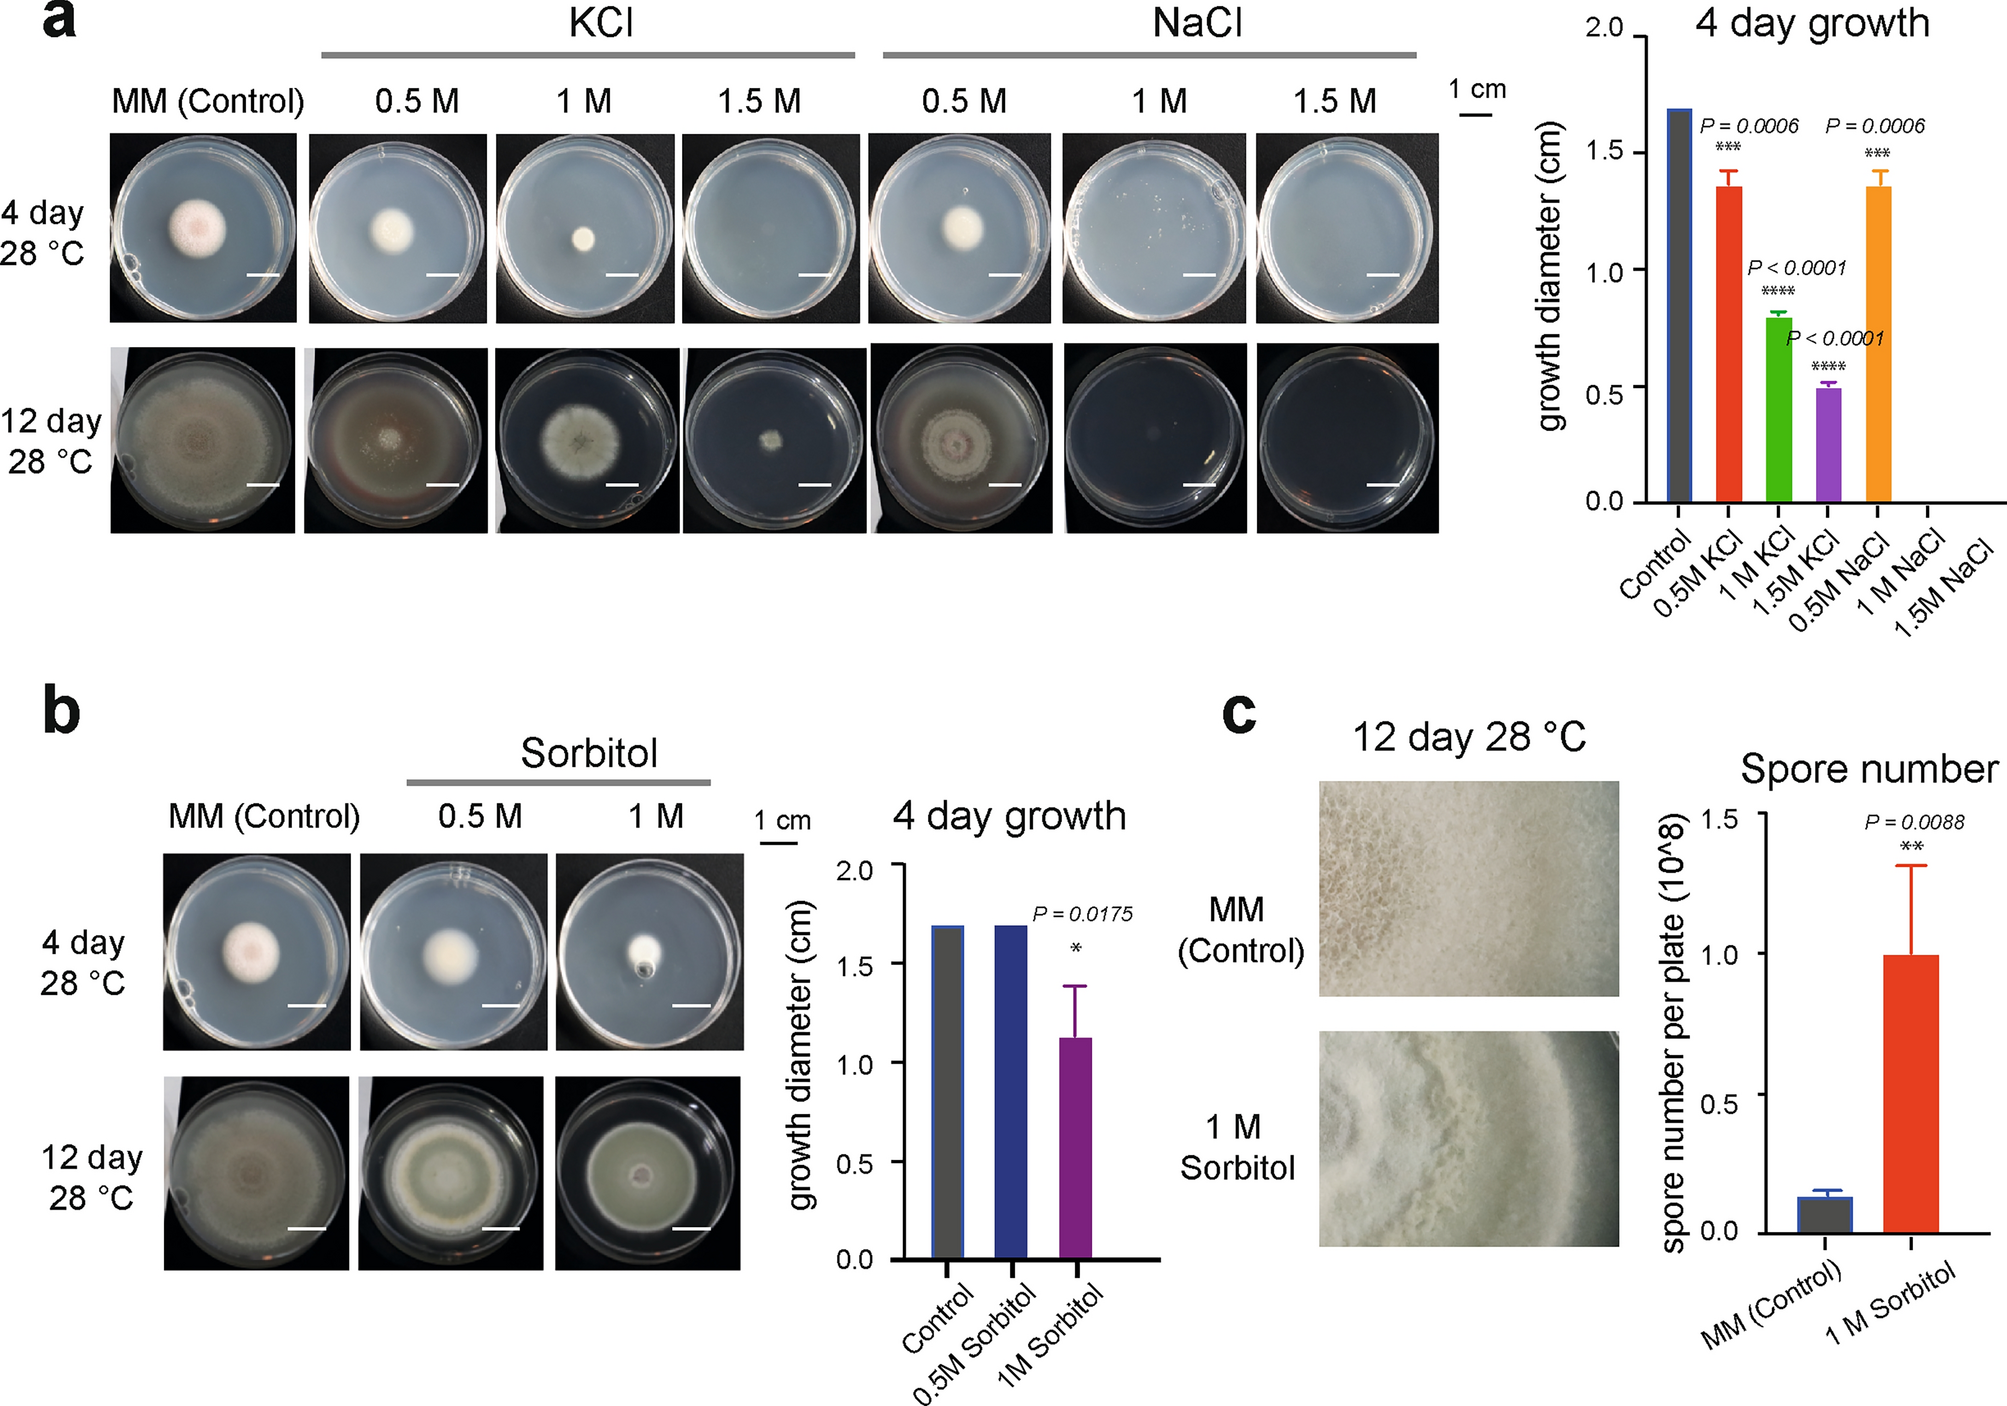 Morphology, Development, and Pigment Production of Talaromyces marneffei are Diversely Modulated Under Physiologically Relevant Growth Conditions